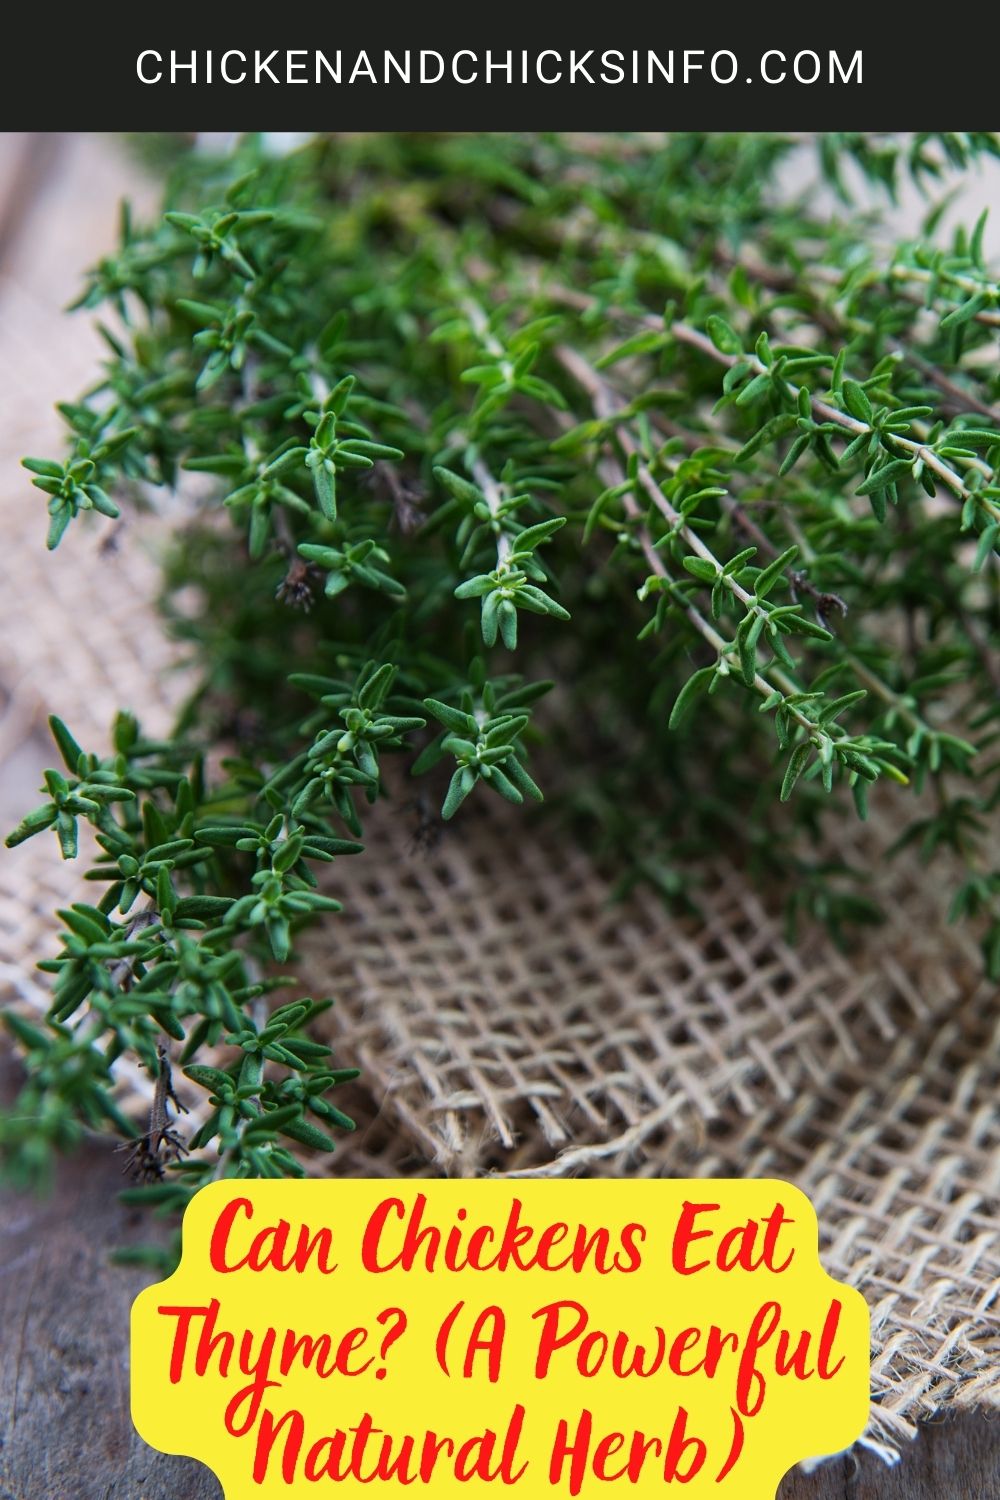 Can Chickens Eat Thyme? (A Powerful Natural Herb) poster.
